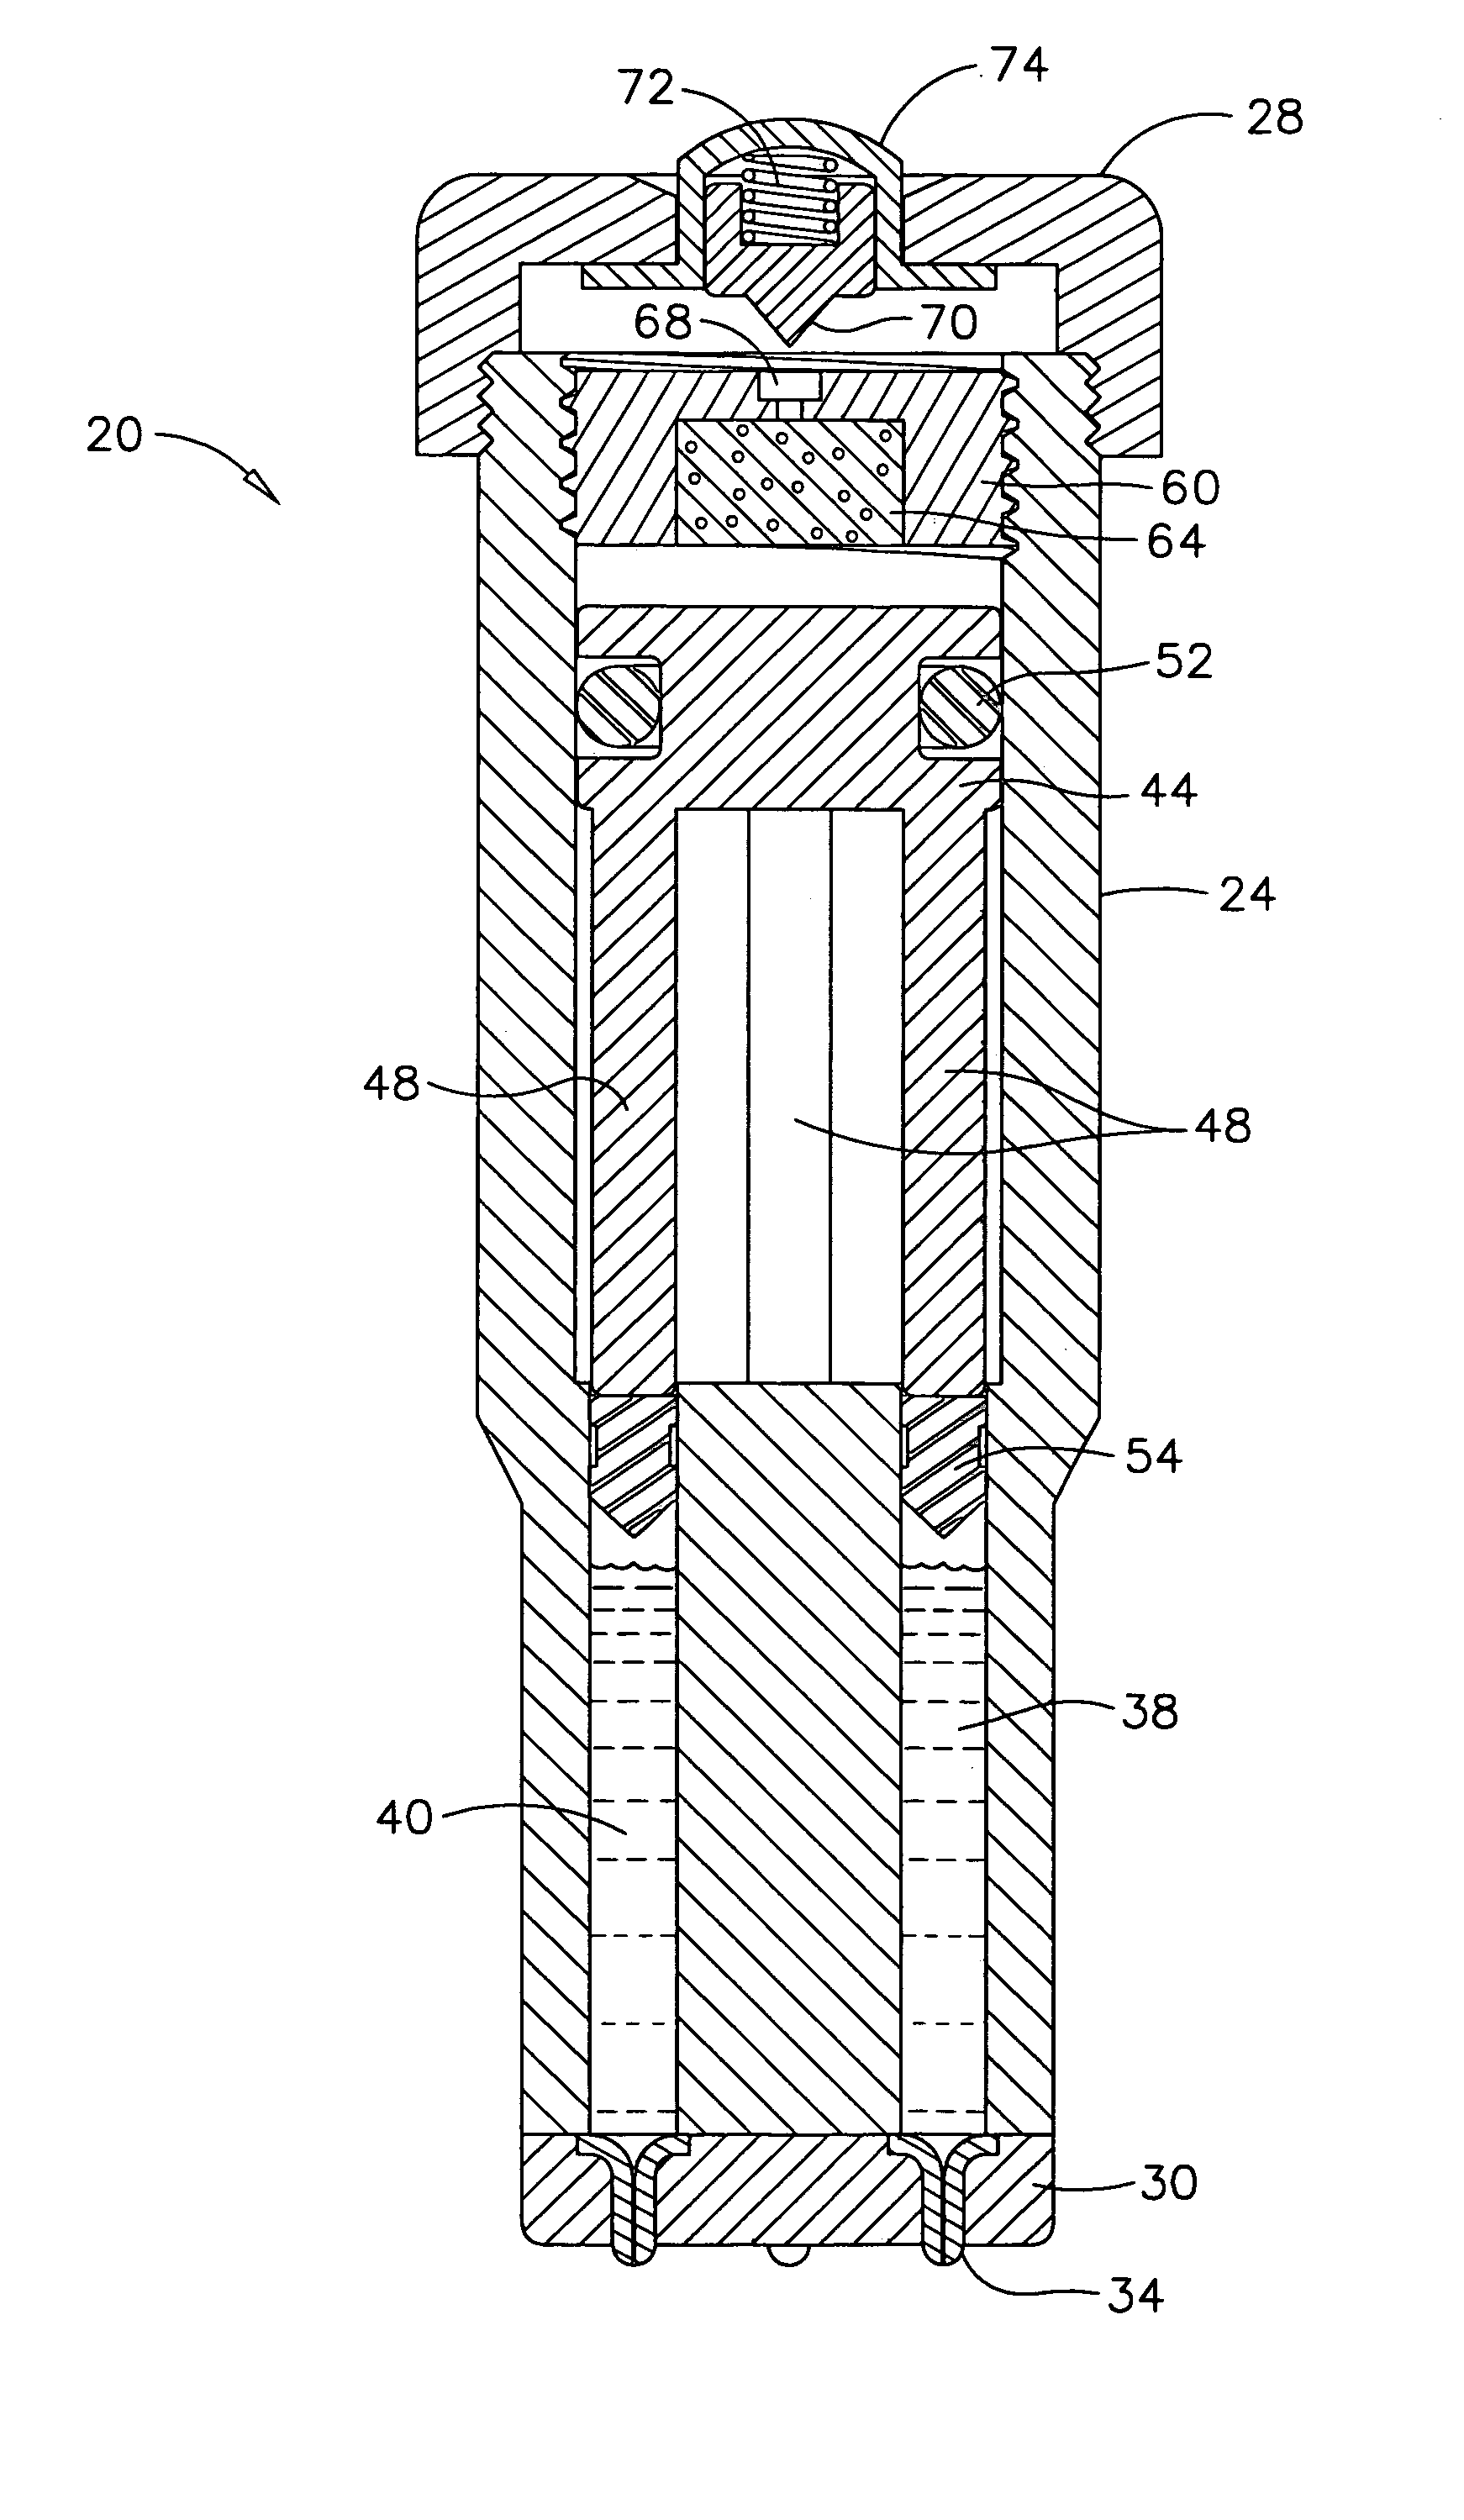 Needle-free jet injection drug delivery device